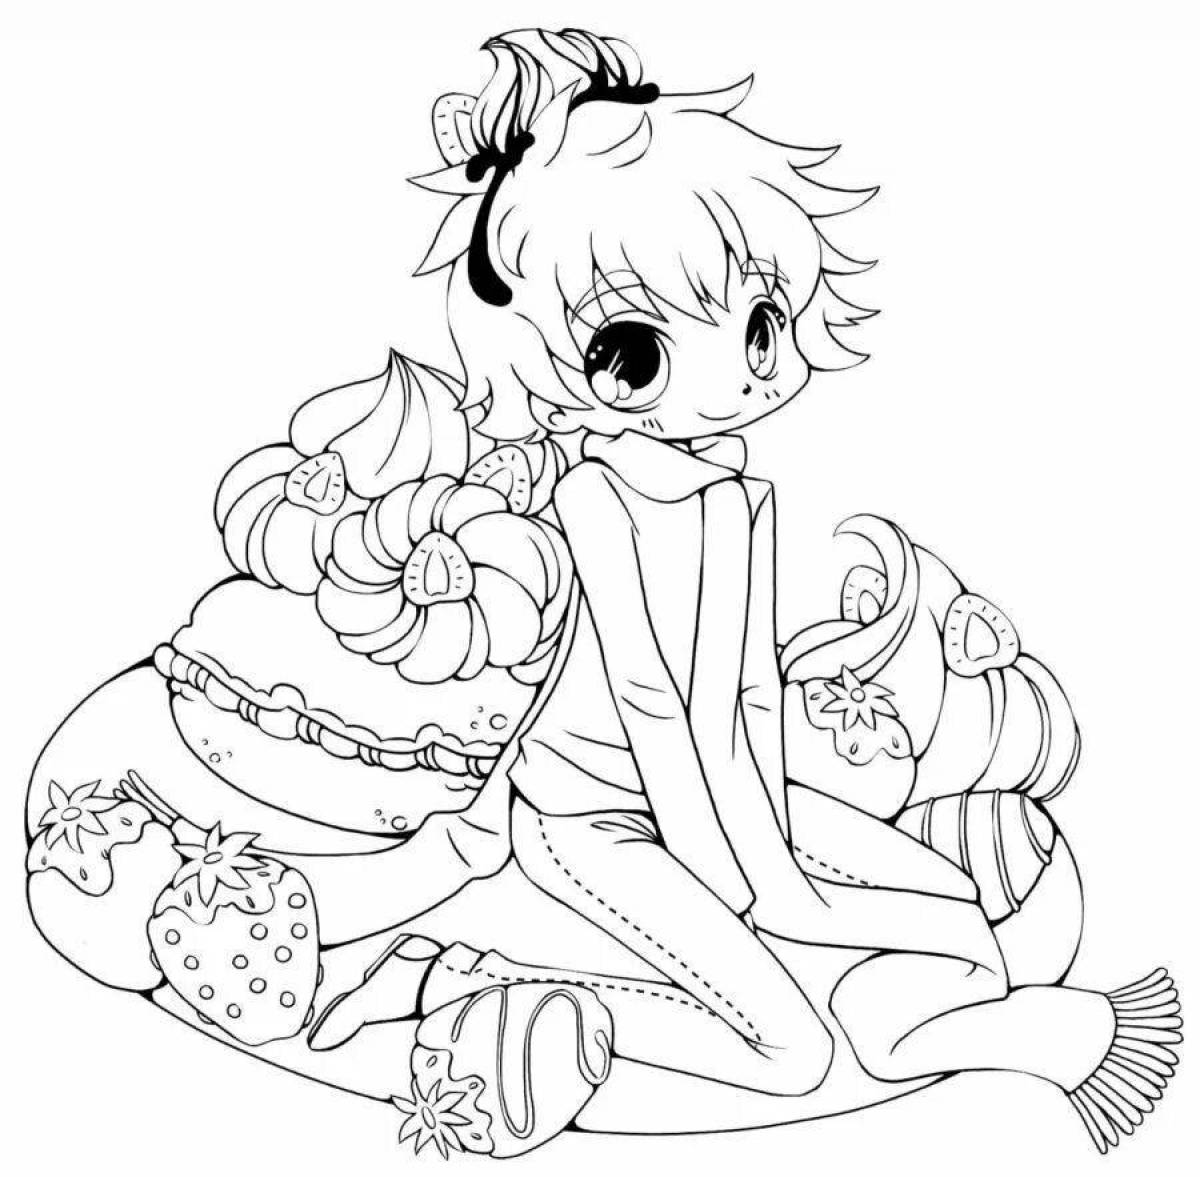 Amazing coloring pages for girls 10 years old, anime cute